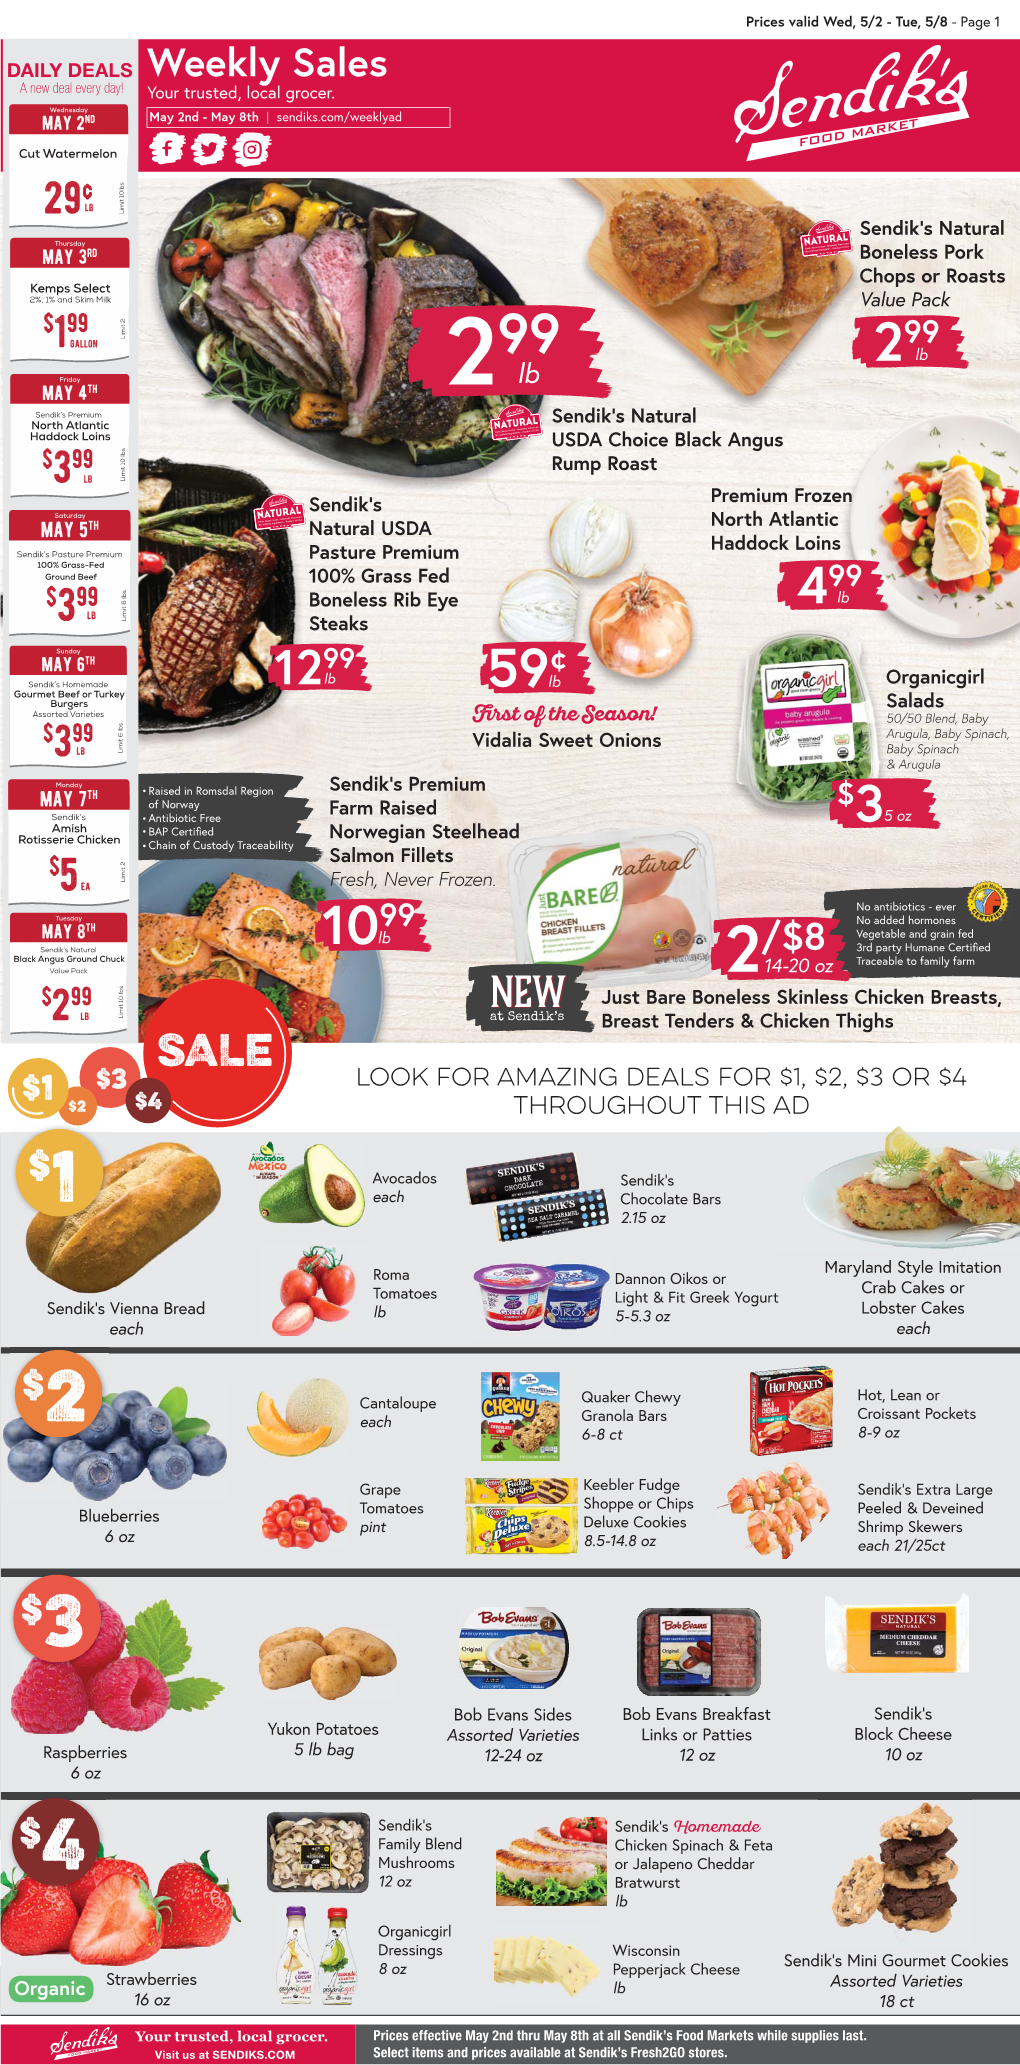 Weekly Sales a New Deal Every Day! Your Trusted, Local Grocer